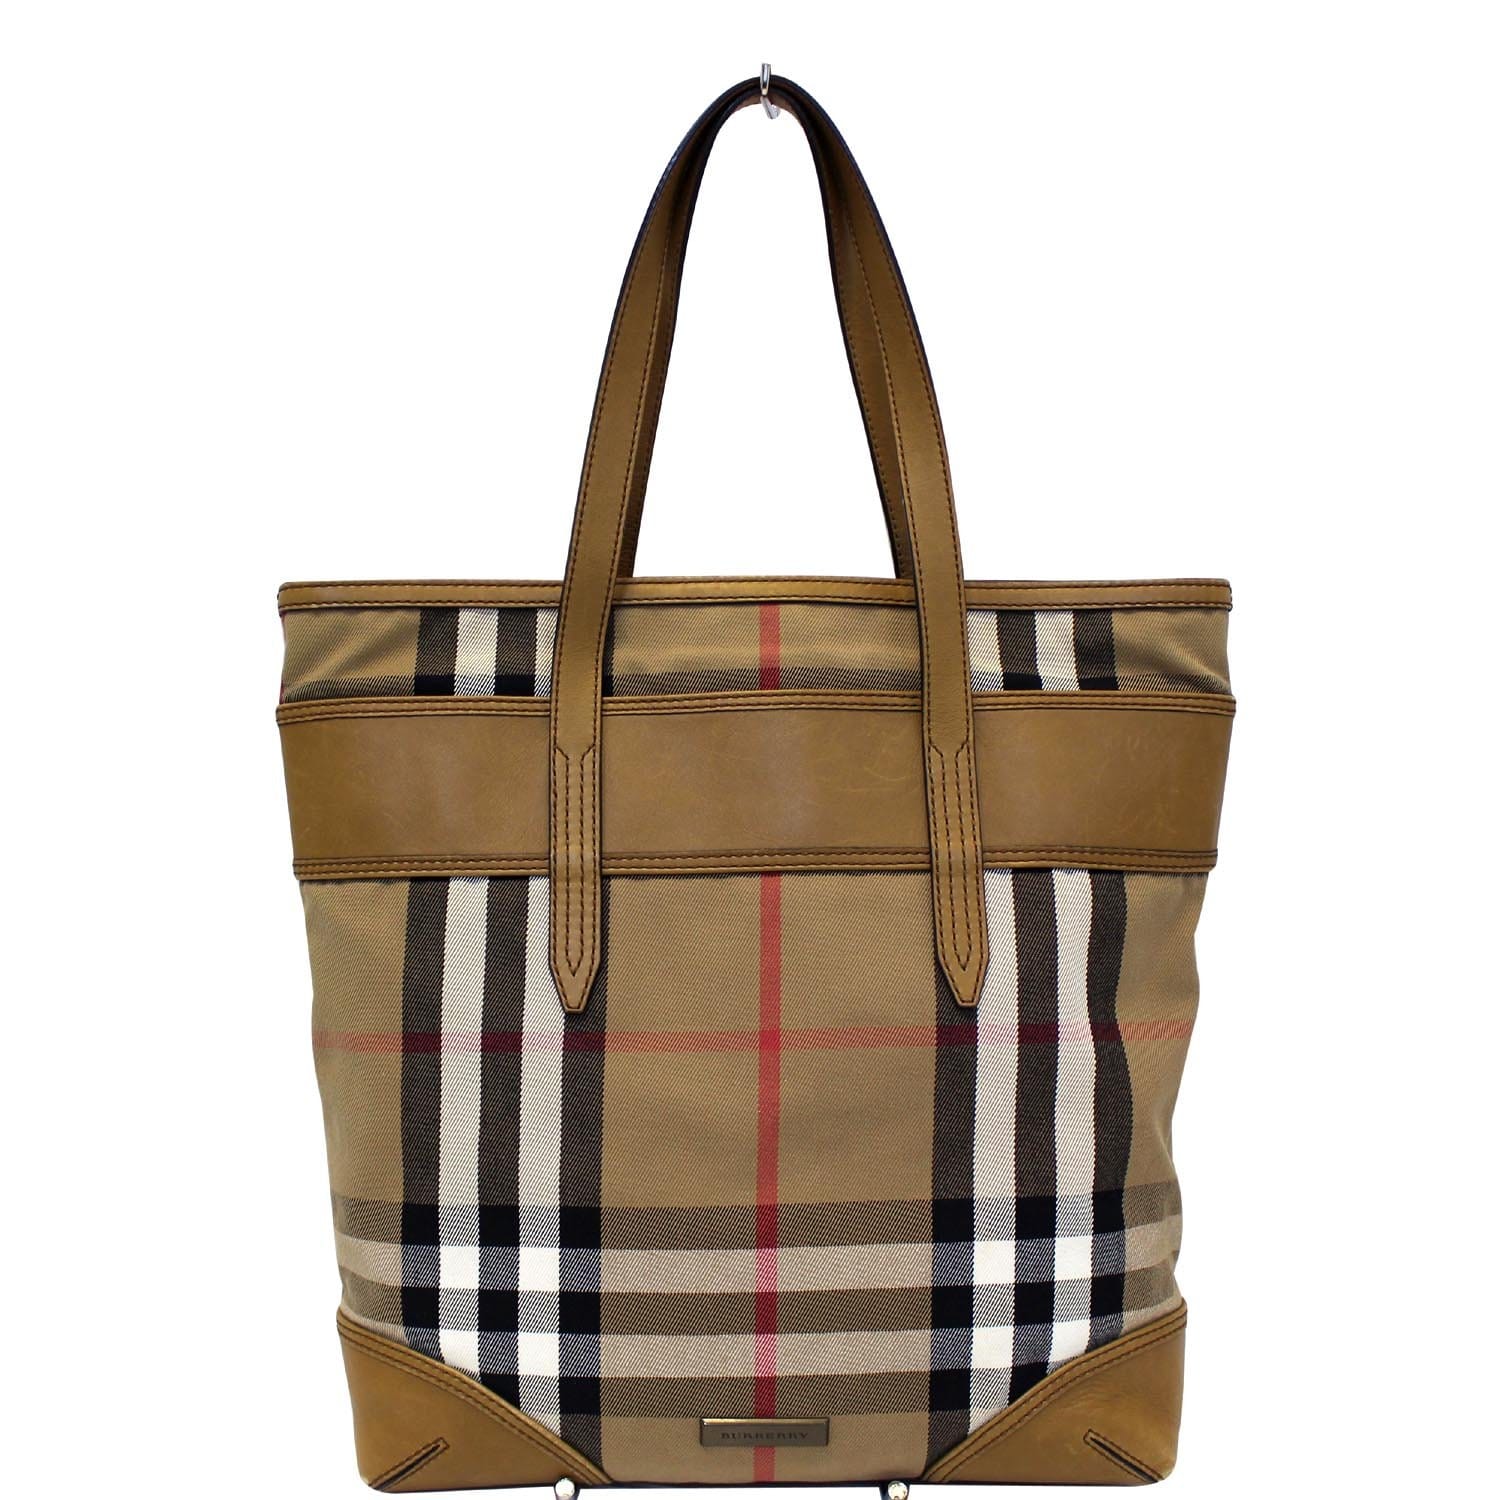 Burberry Tote Bags - Lampoo